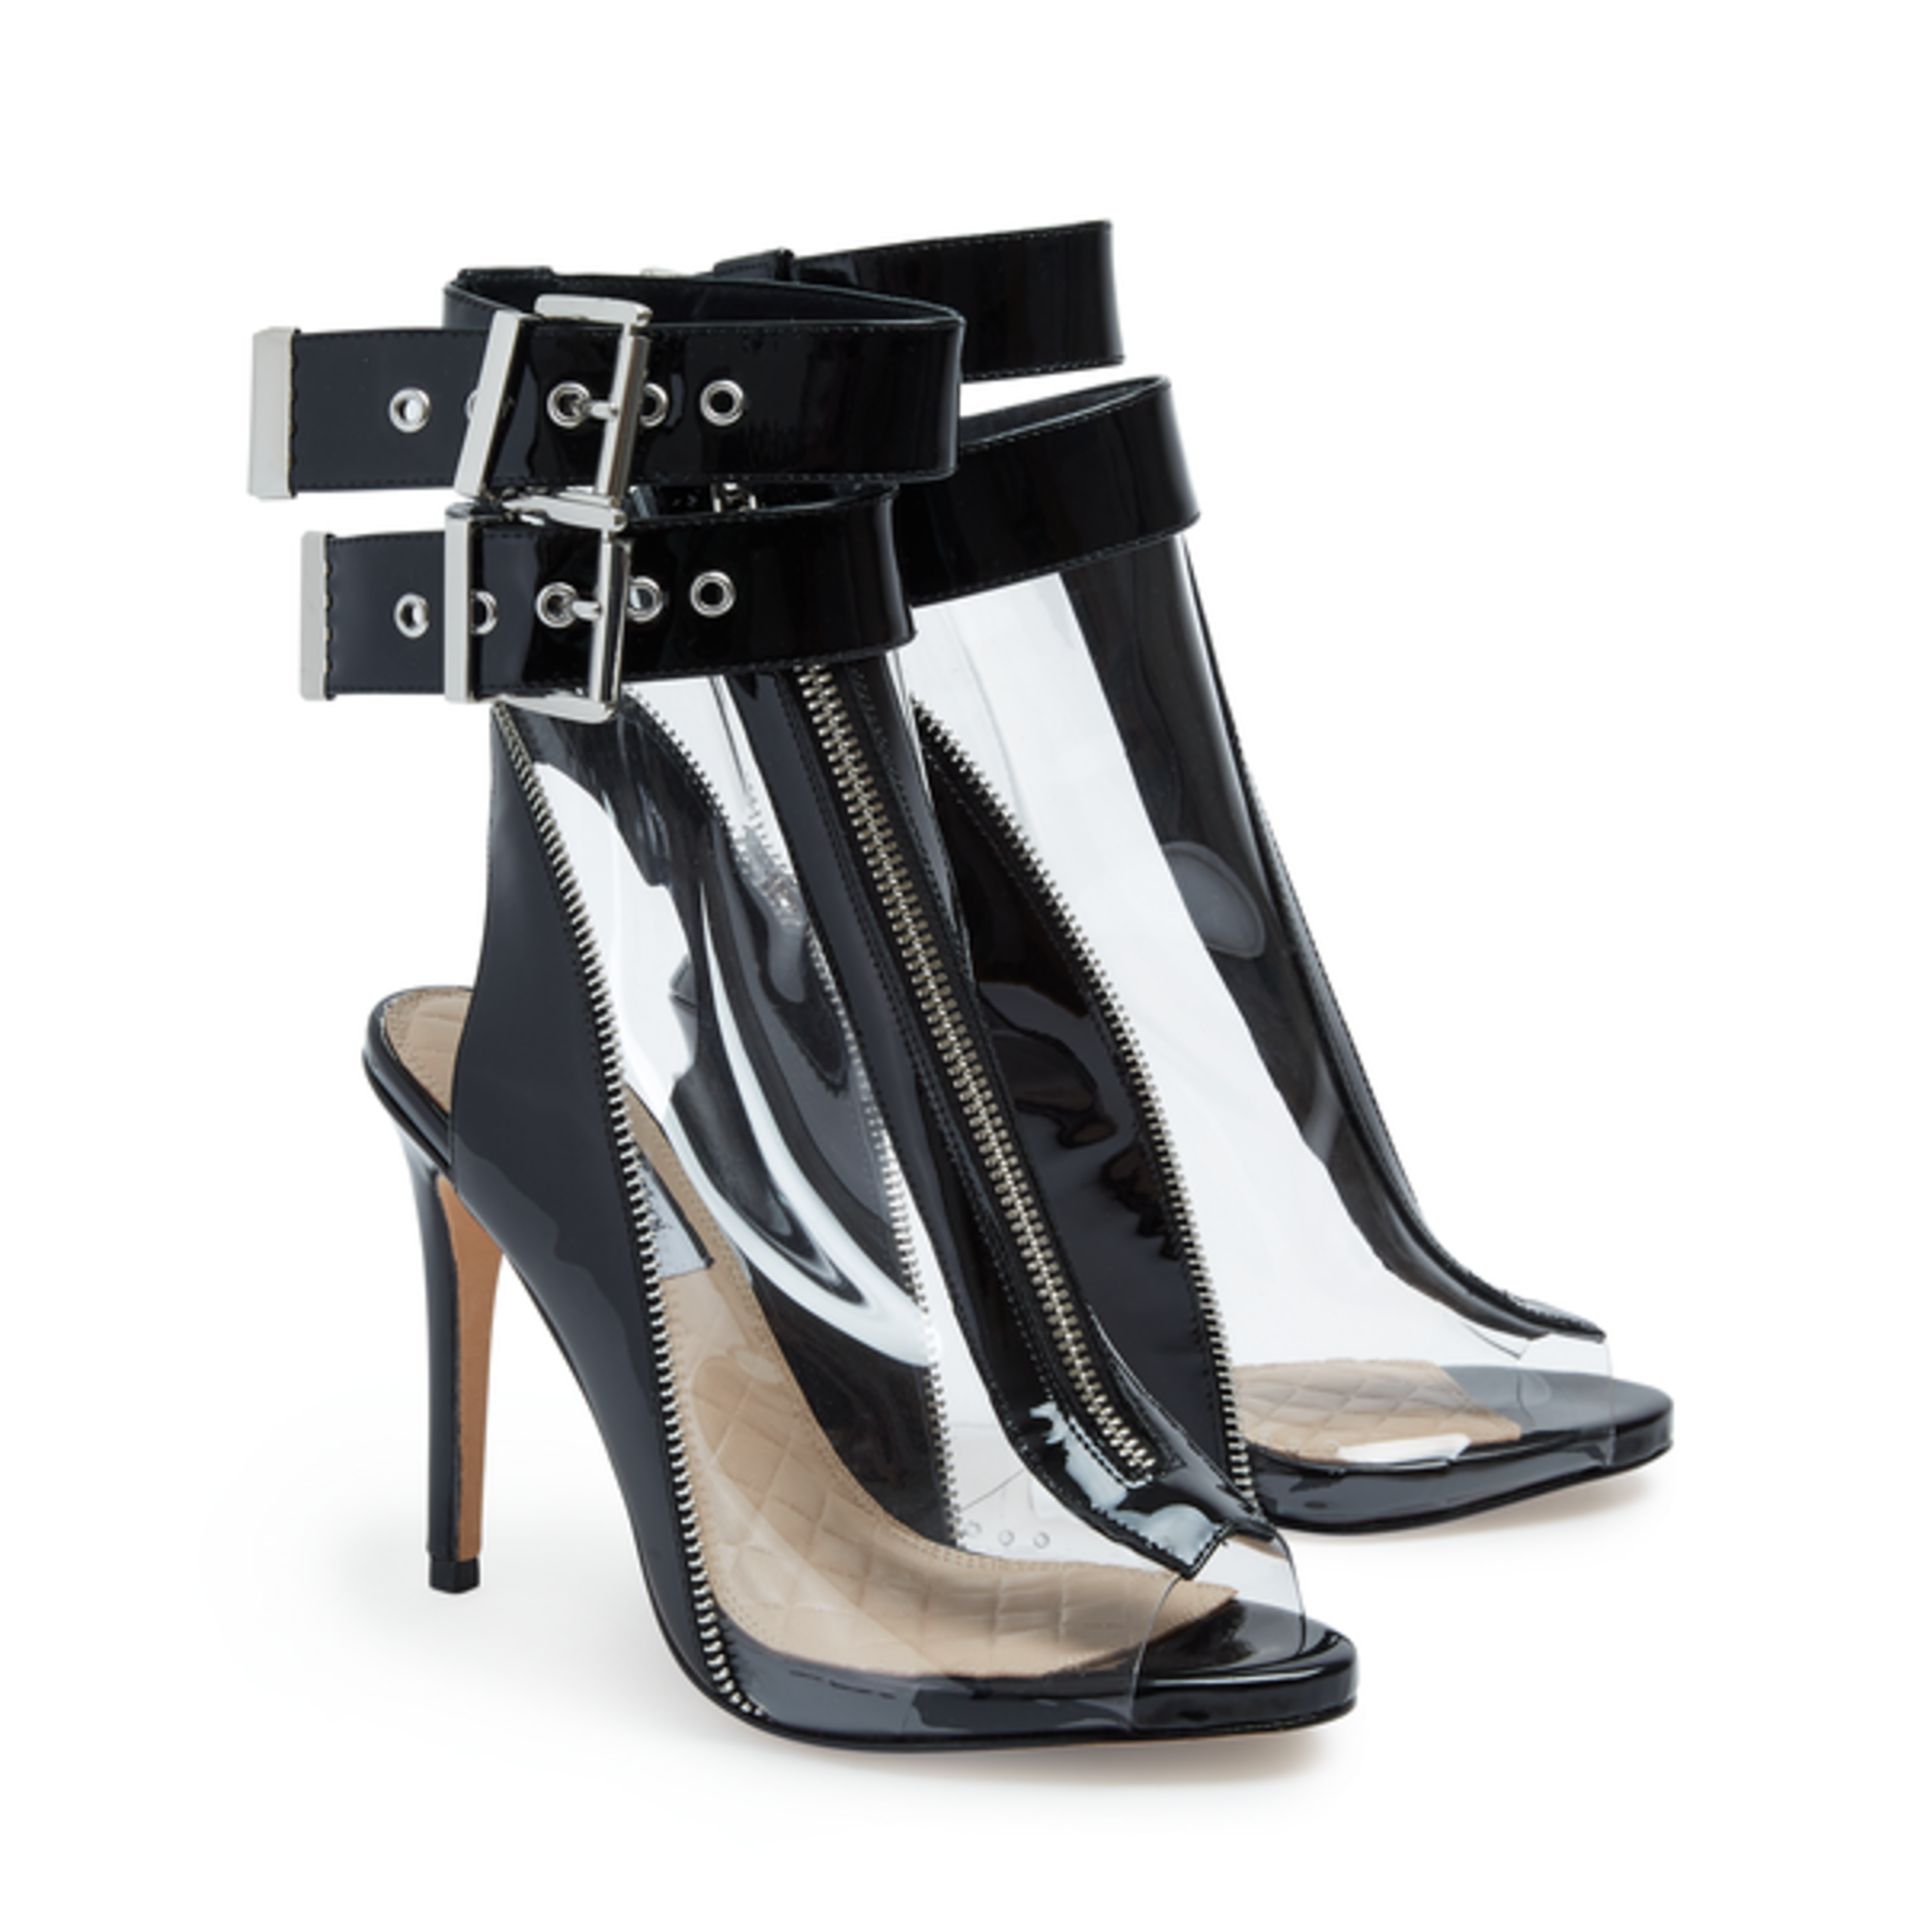 Ex-Display Lucy Choi Stiletto Heel Patent Leather Shoes | Eur 37.5 - Image 5 of 5